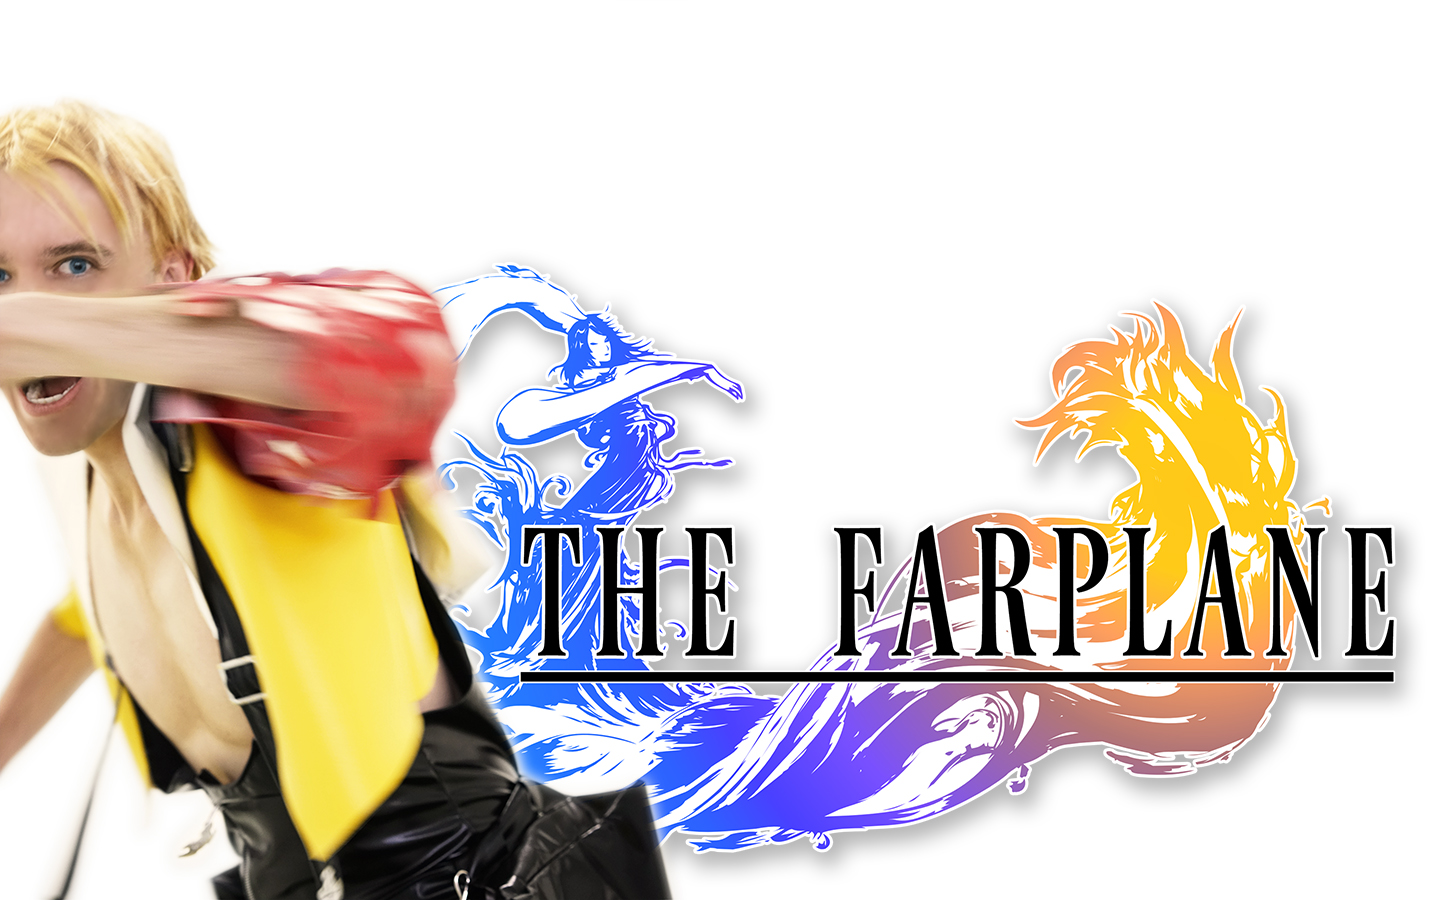 Jesse dressed as Tidus from Final Fantasy 10 yelling and swinging his arm at the camera with text that reads 'The Farplane'